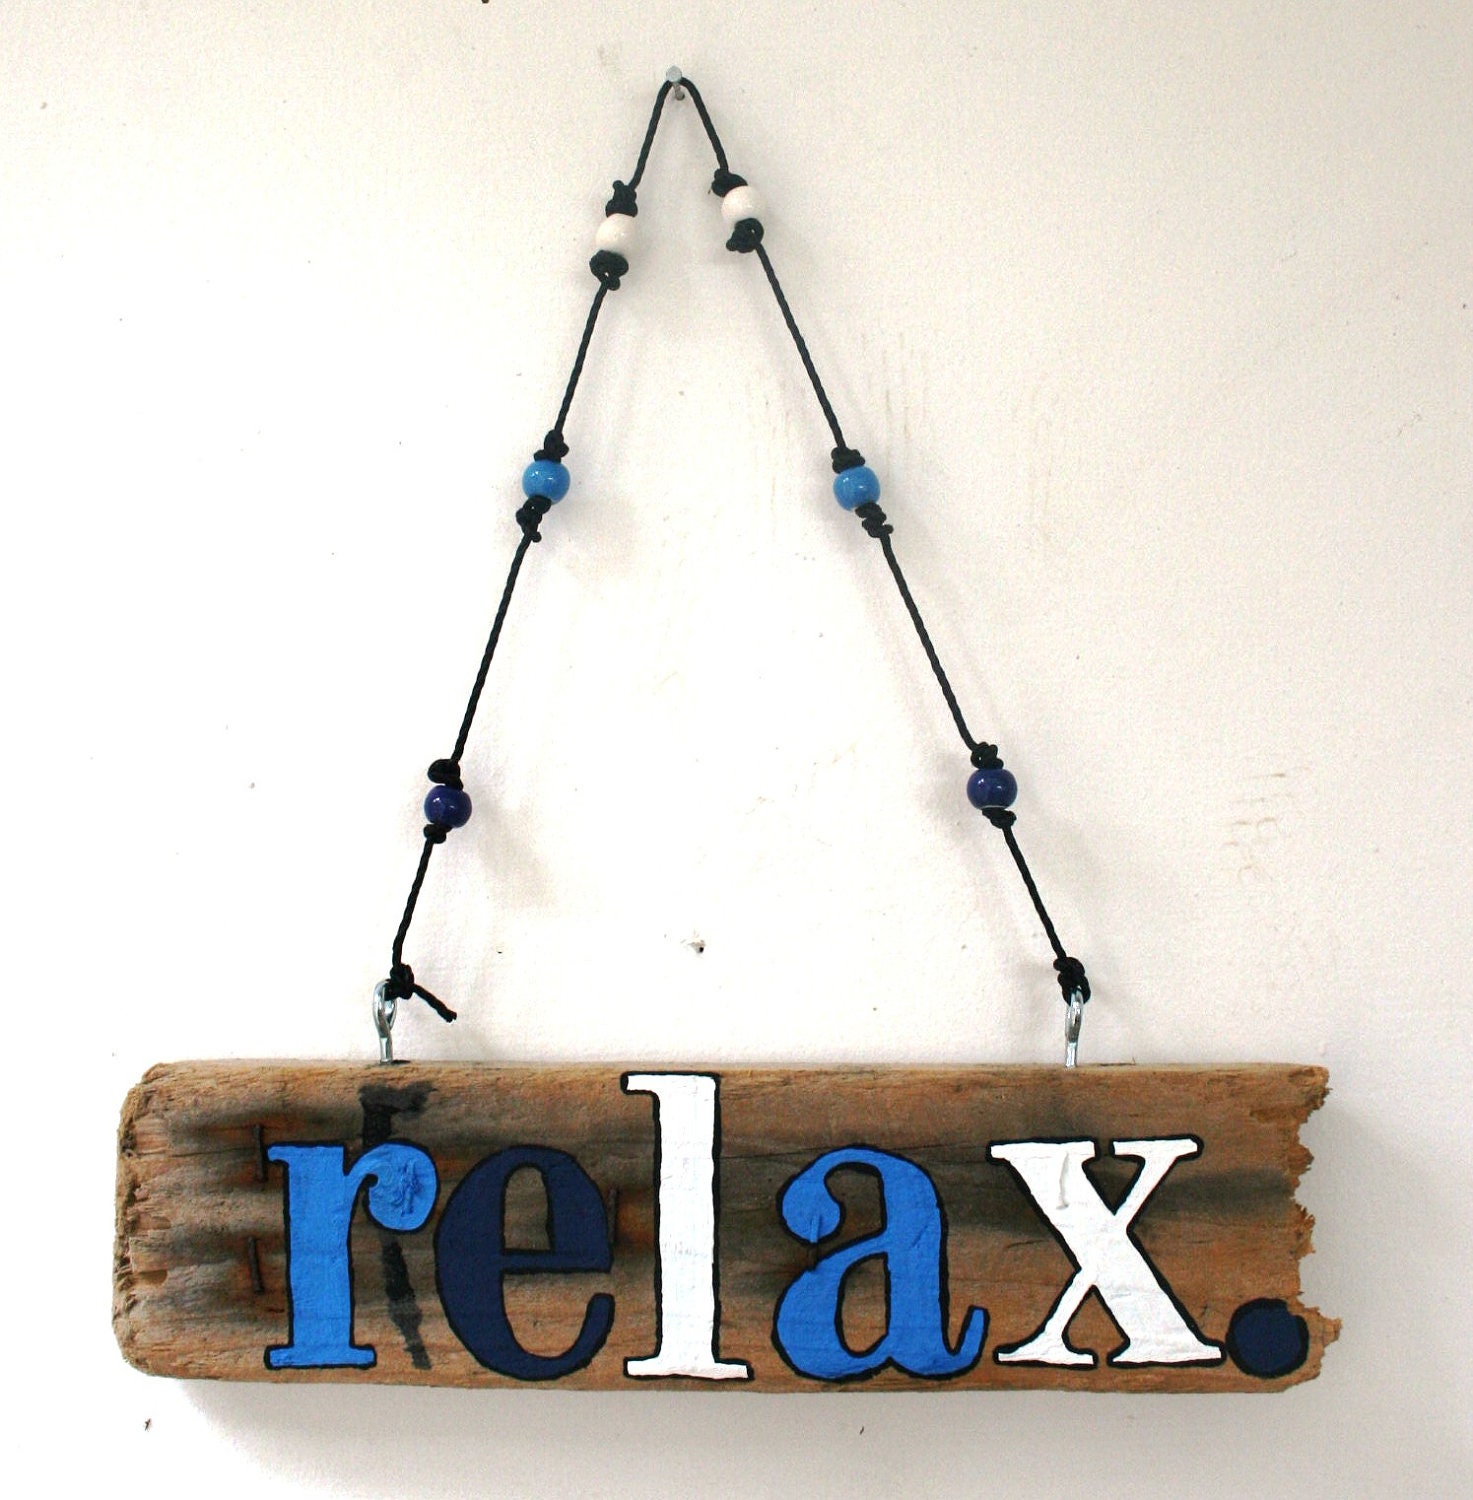 Relax Driftwood Art with blue & white beads (Made to Order) - PeaceLoveDriftwood